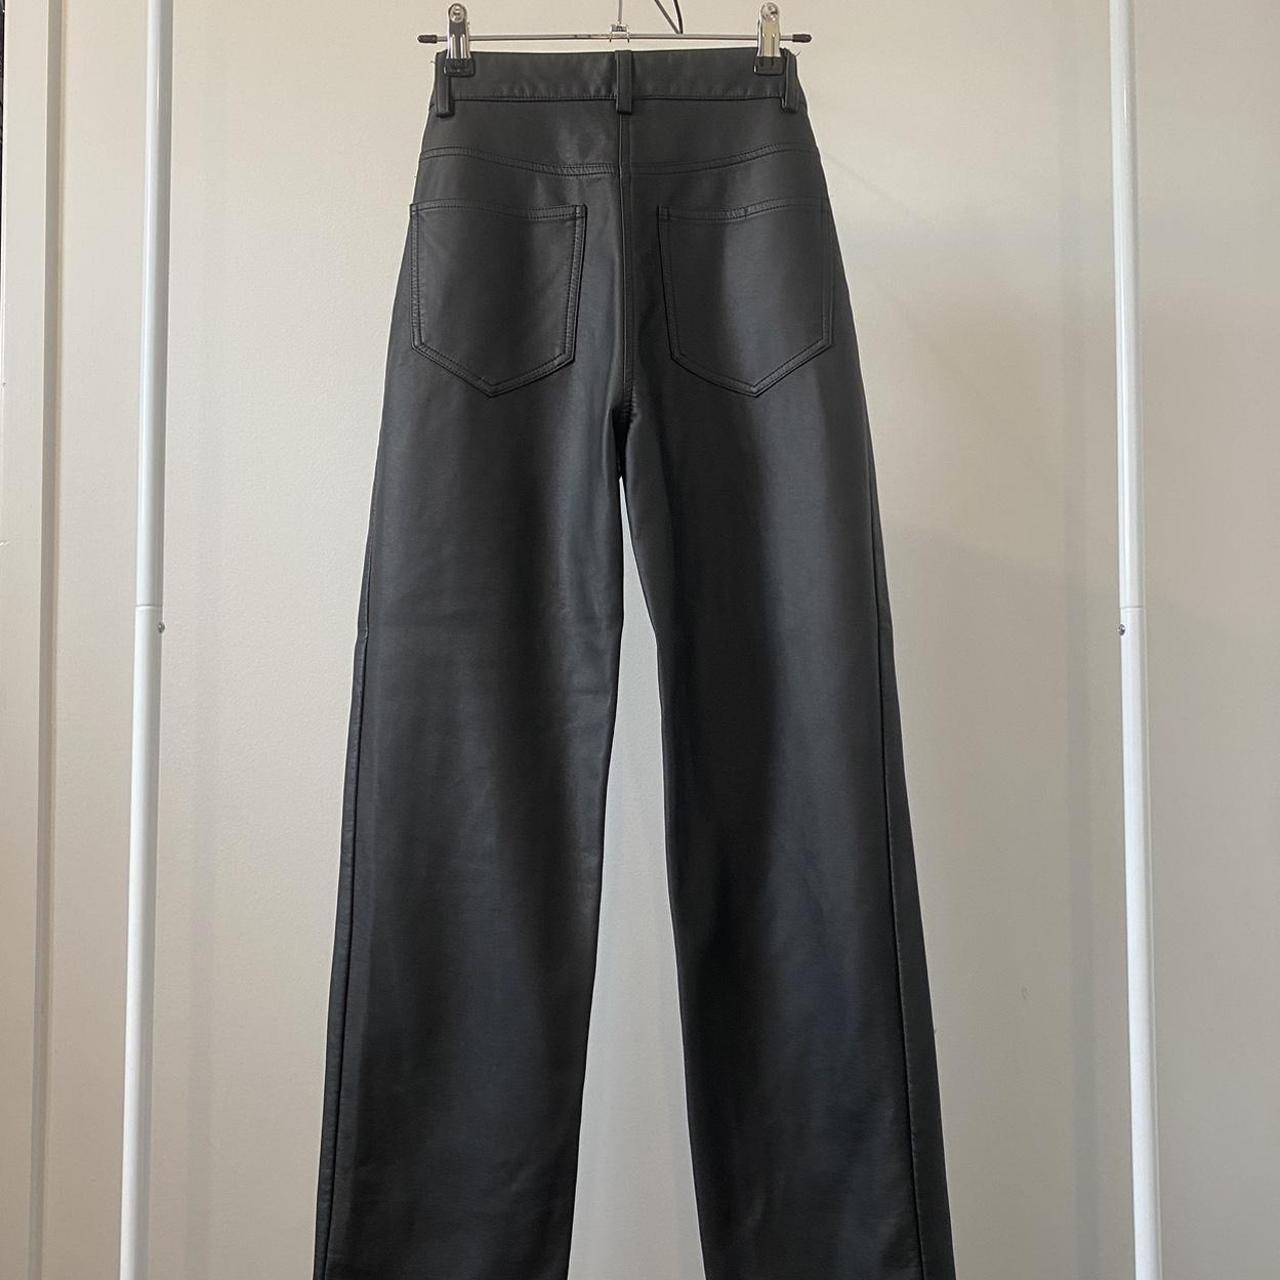 Glassons leather looking pants Aus size 6 Run... - Depop